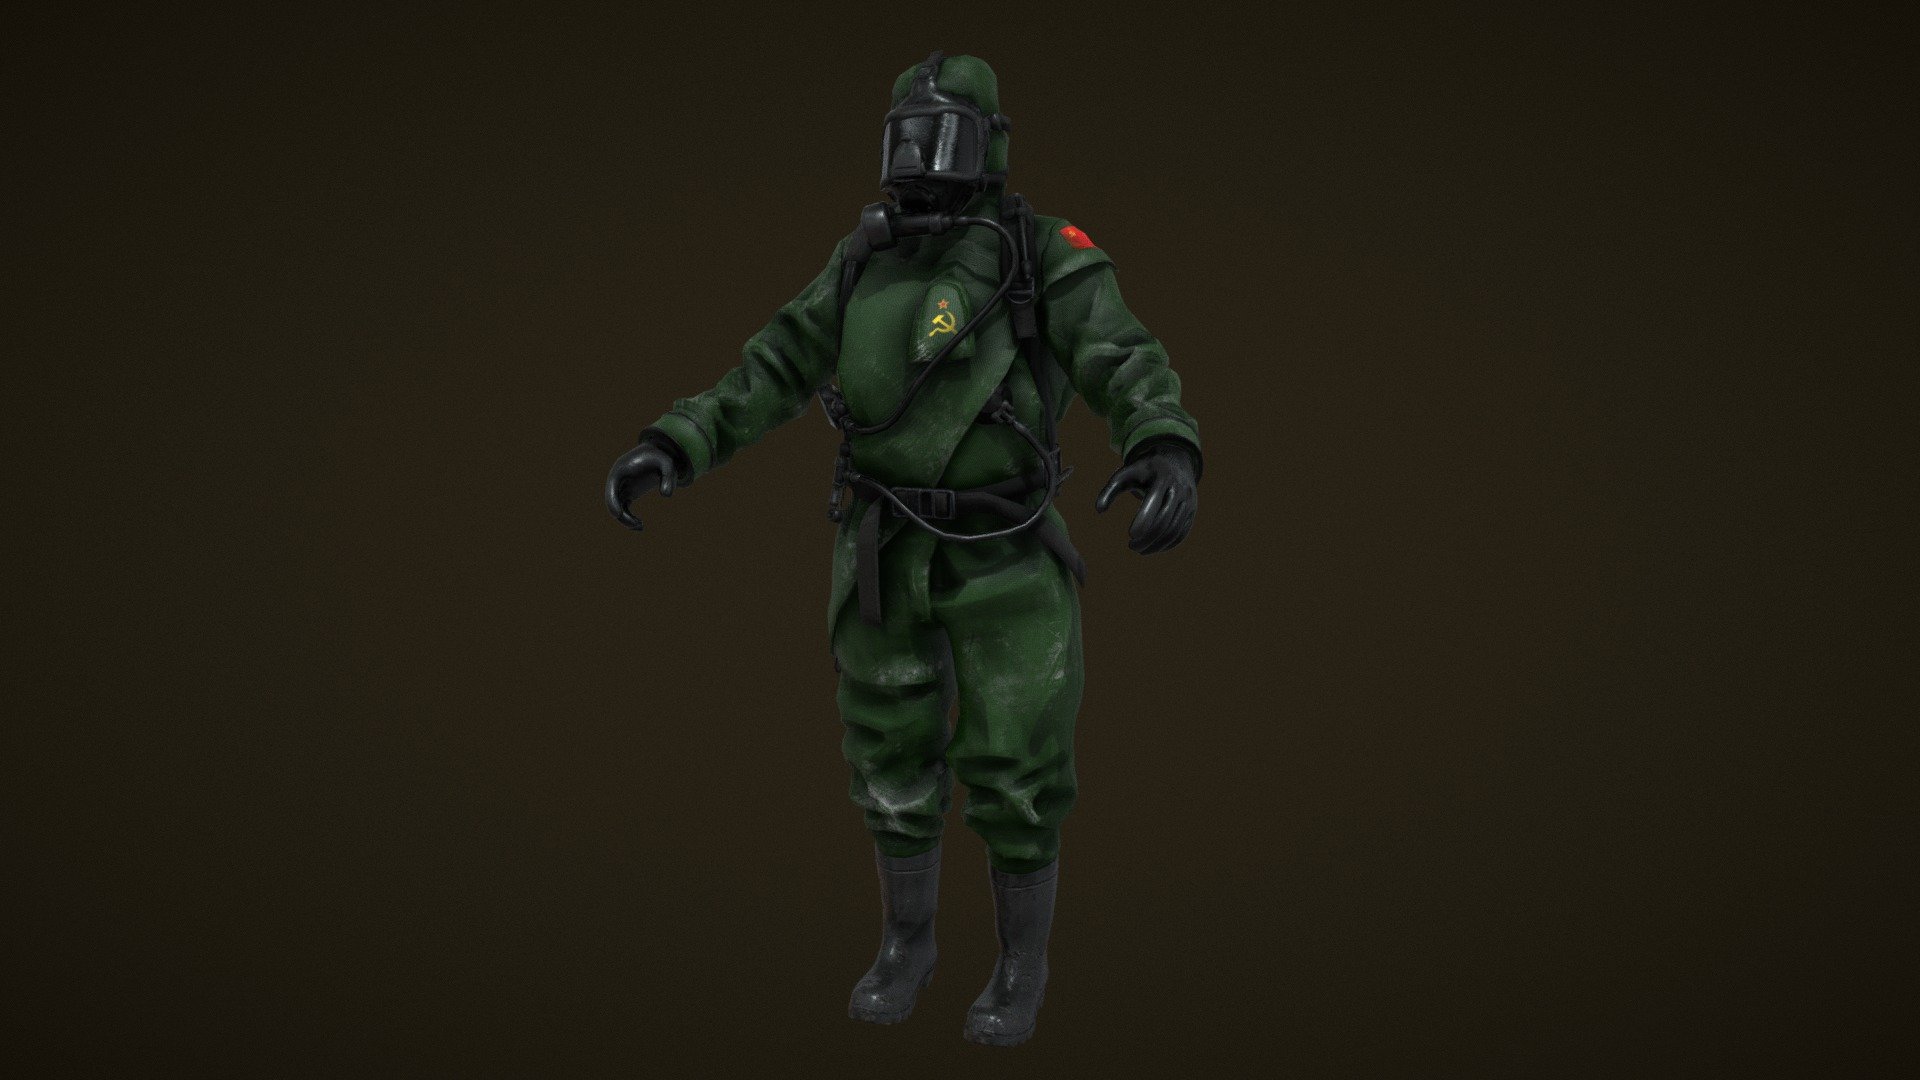 Hazmat (SCP Containment Breach) - Download Free 3D model by SCP Games  (@SCPGames) [6361b44]